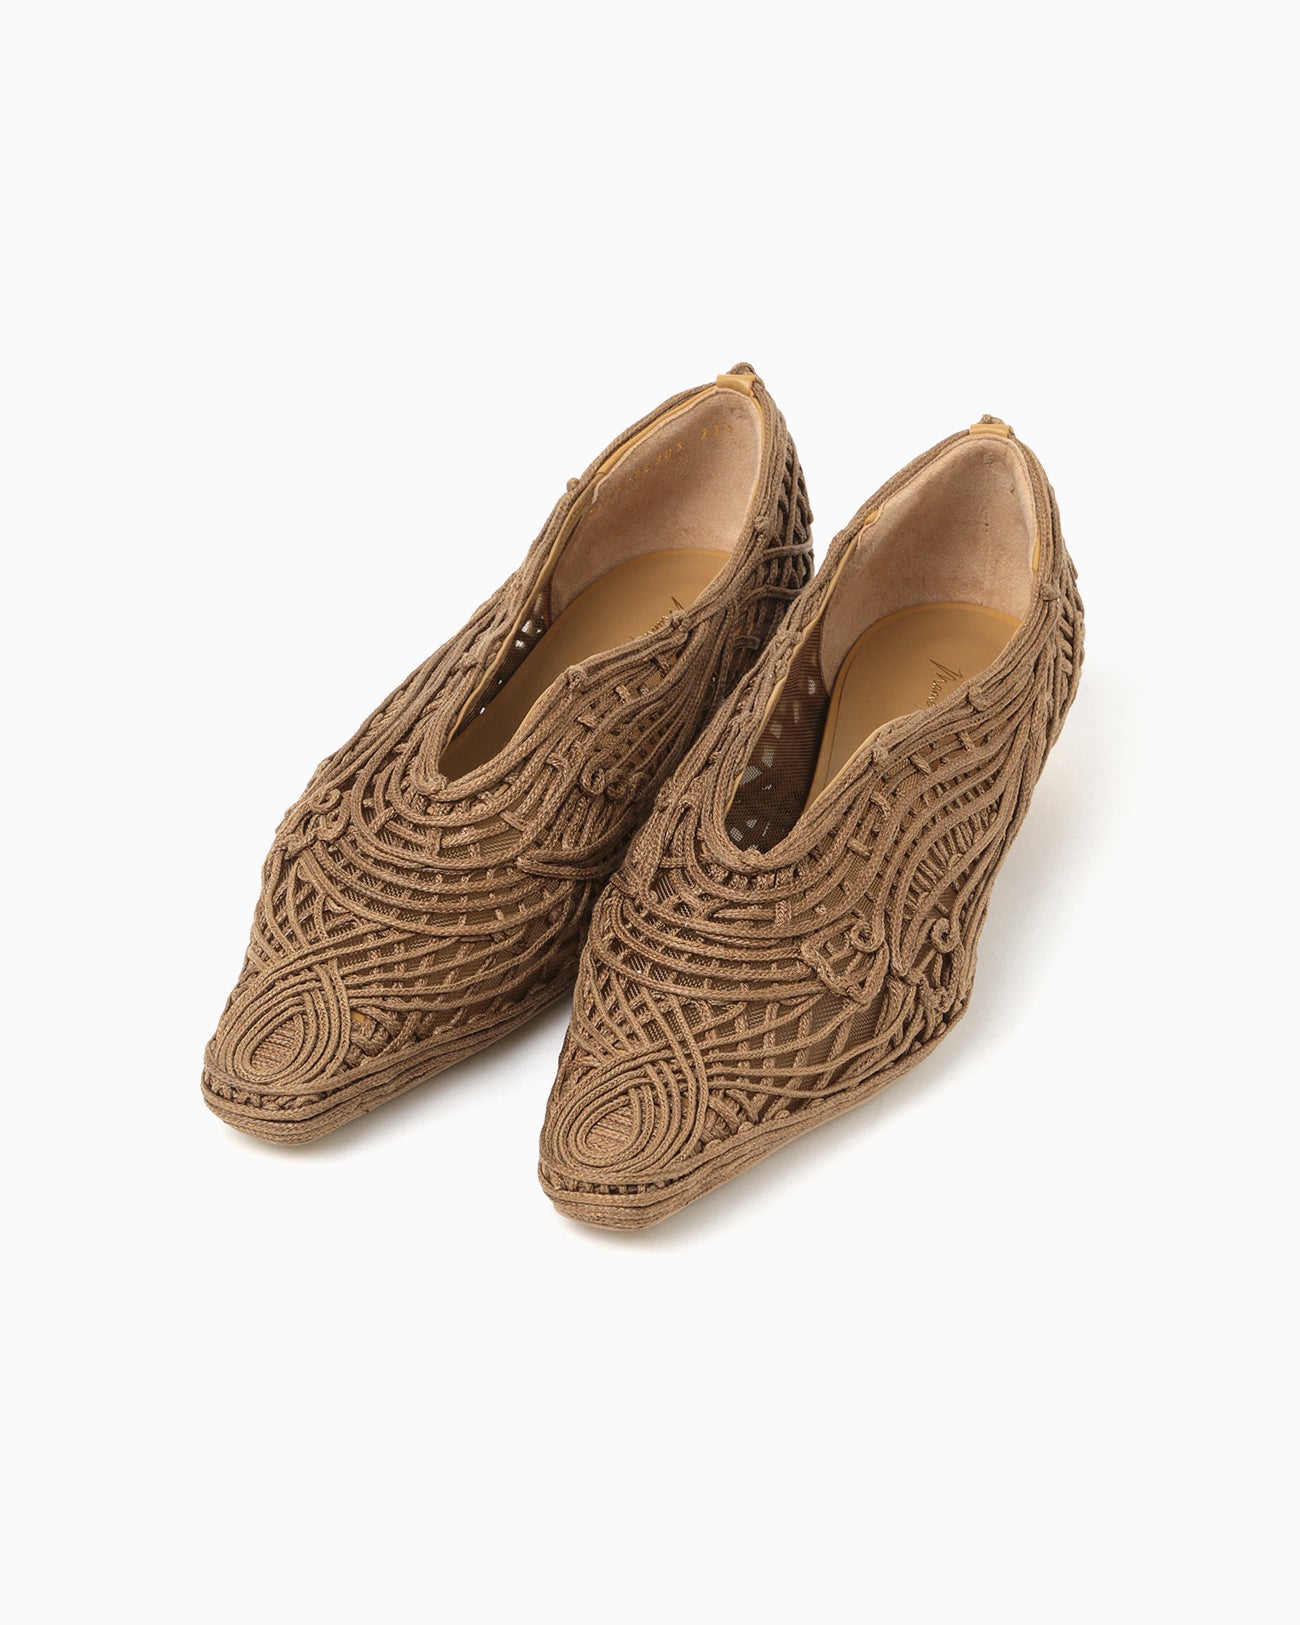 Cord Embroidery Egg Heel Pumps - brown